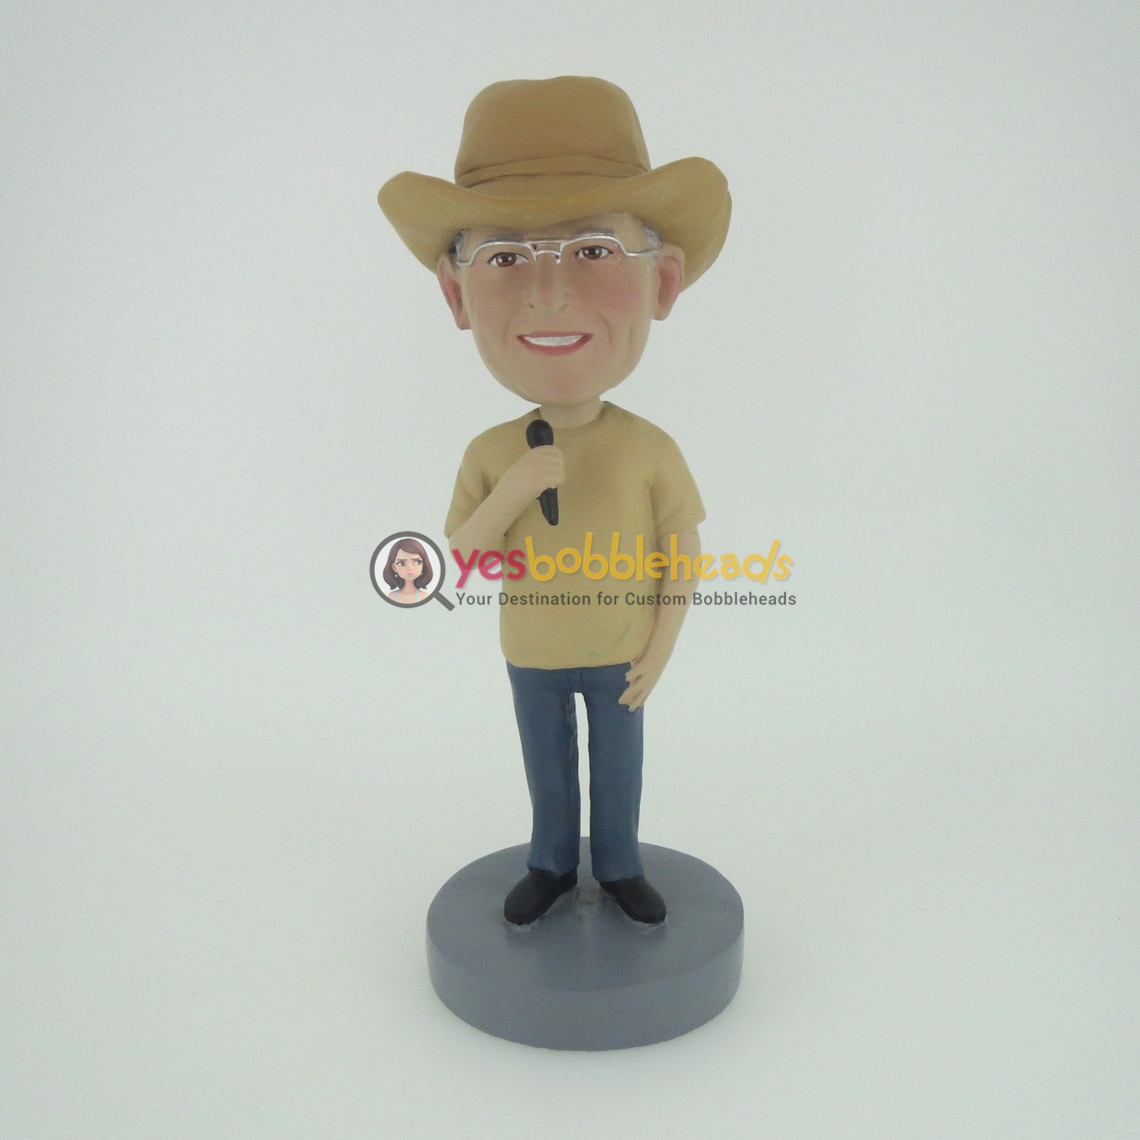 Picture of Custom Bobblehead Doll: Cowboy Singer